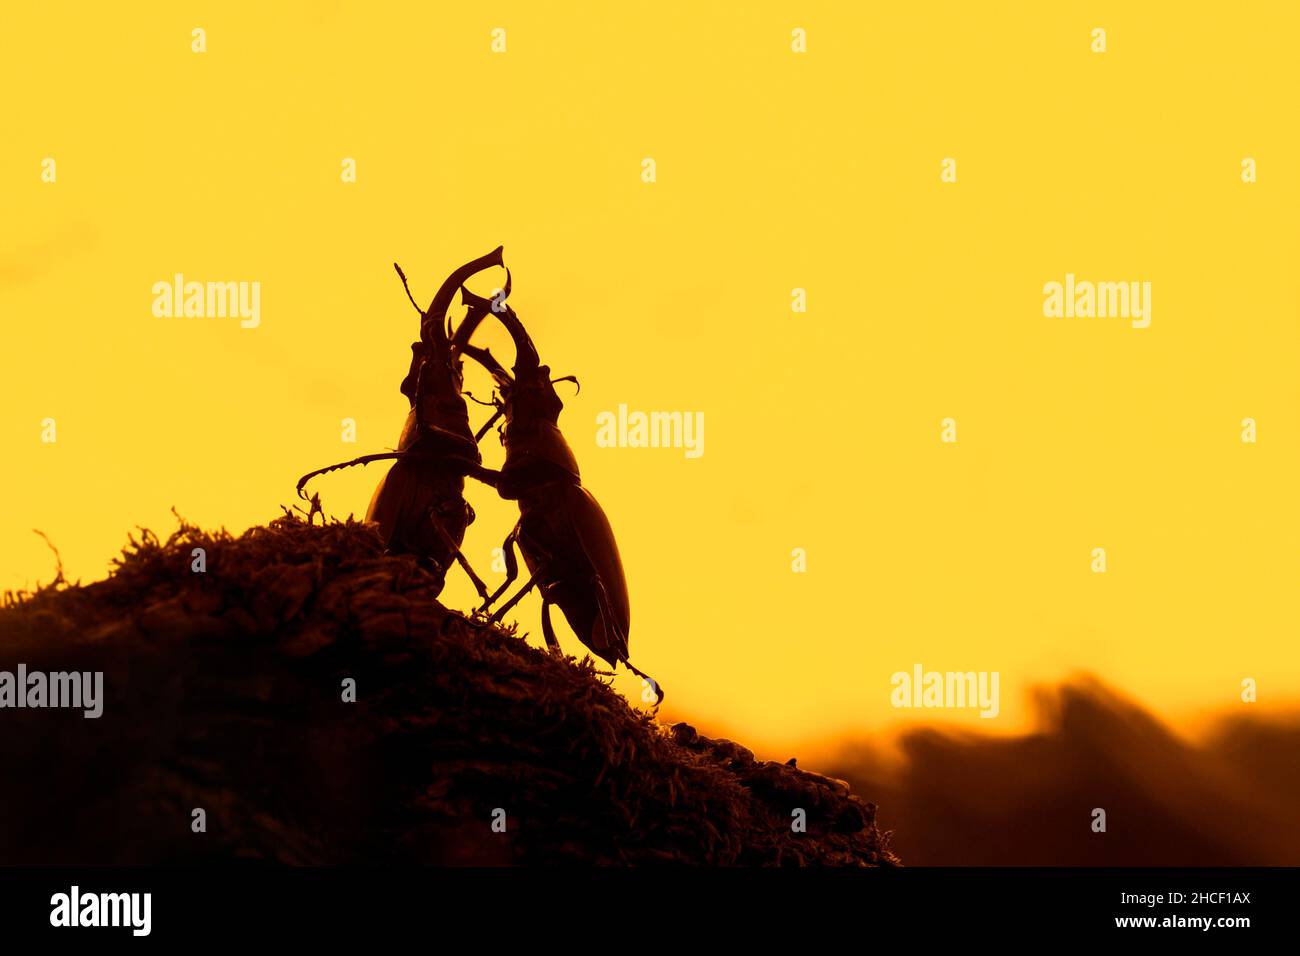 Two European stag beetle males (Lucanus cervus) fighting / wrestling with large mandibles / jaws, silhouetted against yellow sunset sky in summer Stock Photo